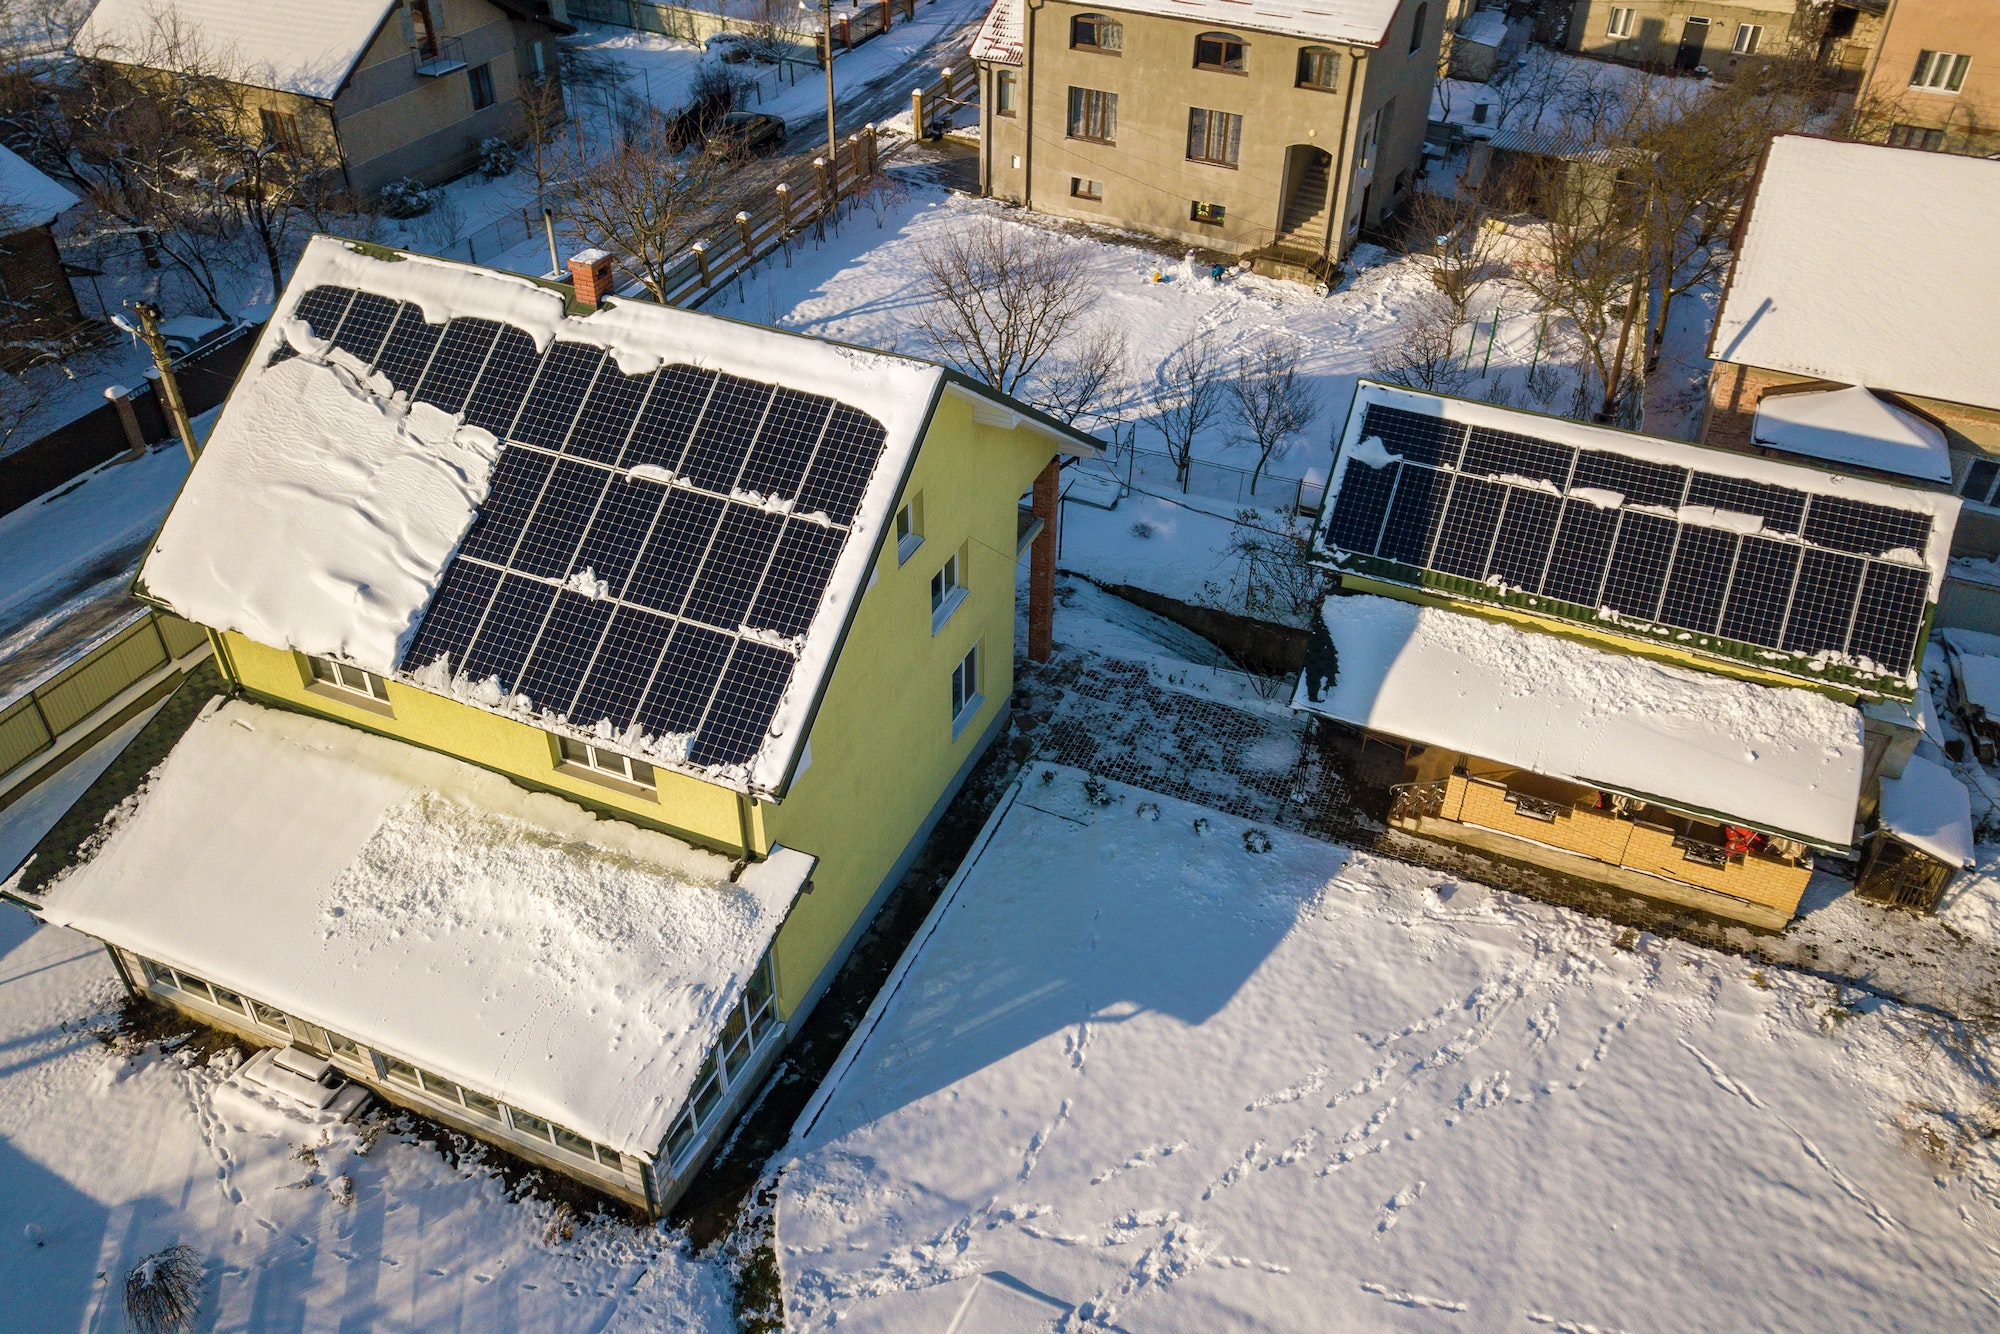 House roof covered with solar panels in winter with snow on top. Energy efficiency and maintenance